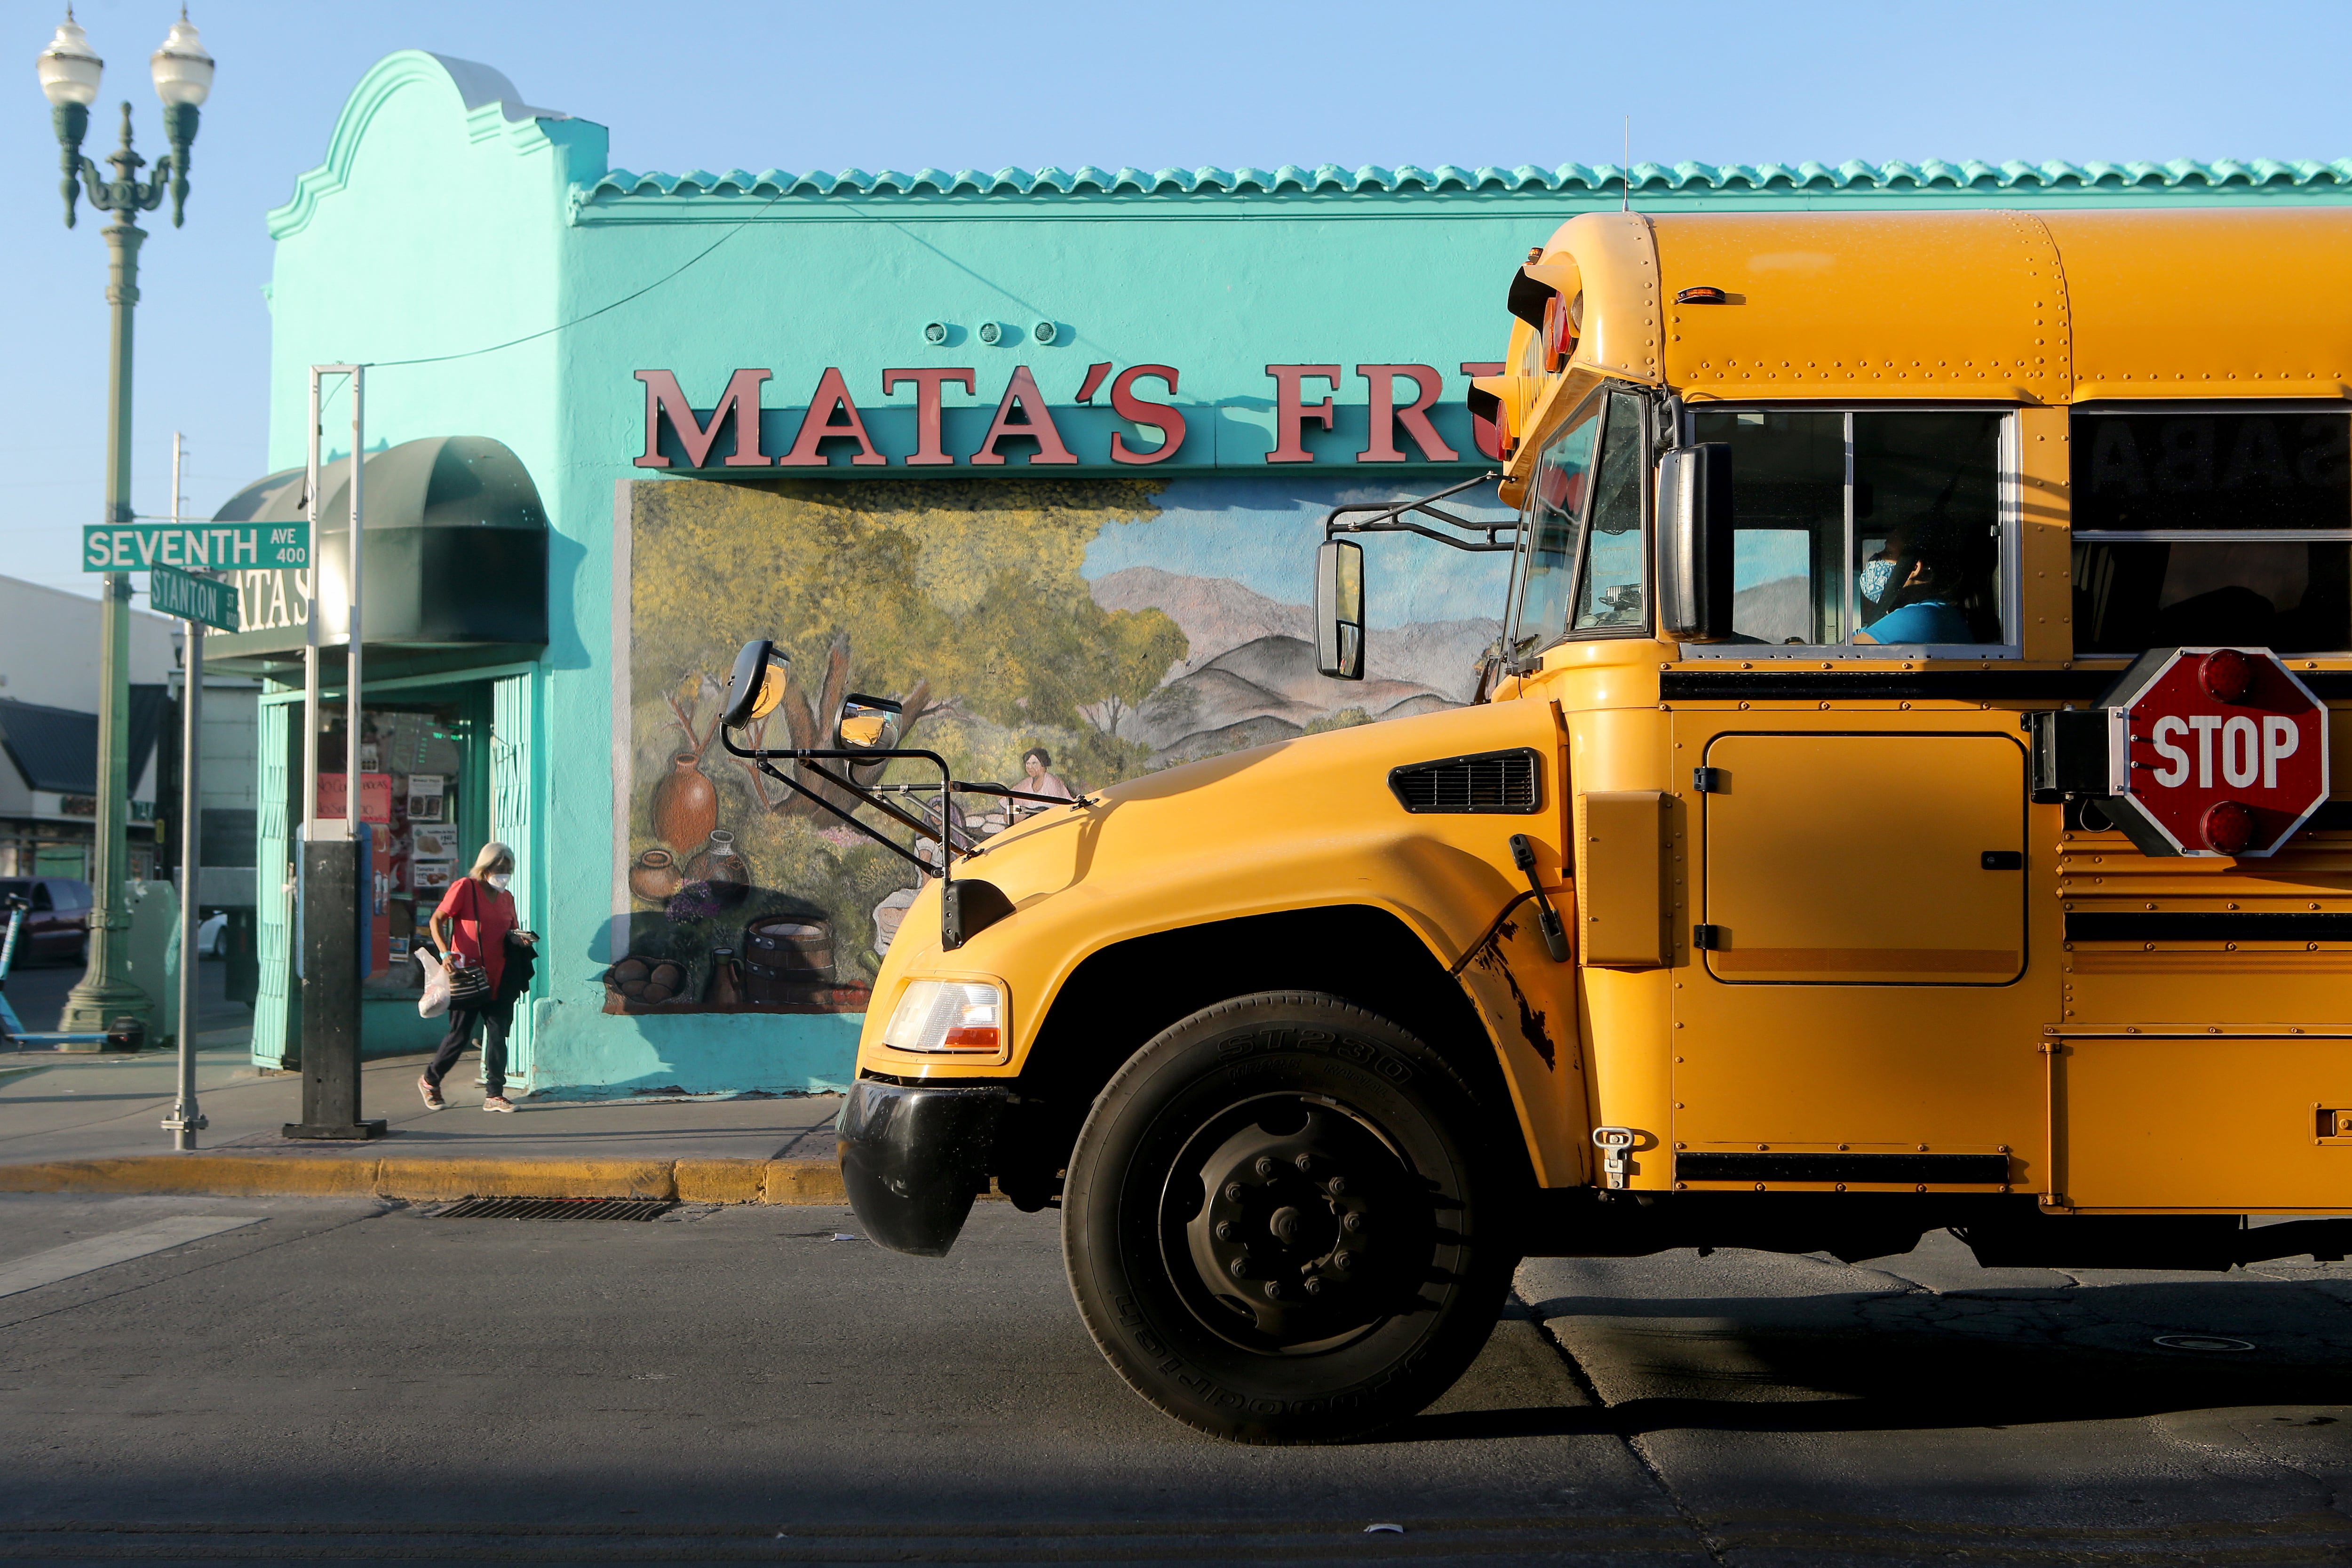 A yellow school bus with a masked driver drives up to an intersection in El Paso, Tex. There is a vibrant teal-colored storefront with a blonde woman wearing a pink shirt walking by on the corner of the street.